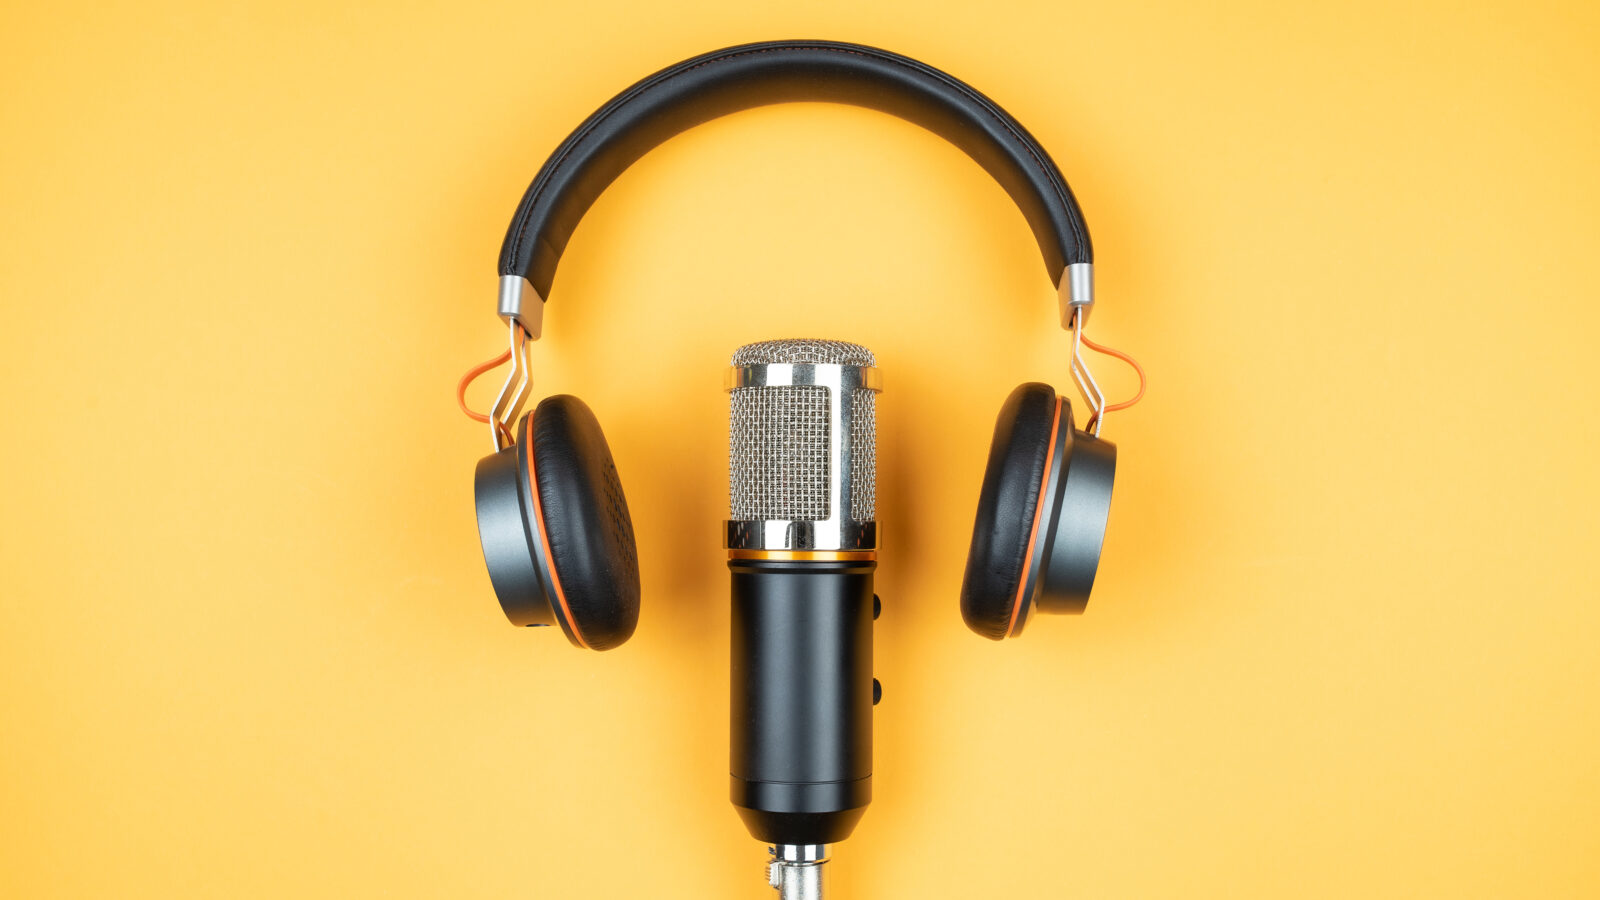 How an audio mix strategy can provide an uplift in brand awareness